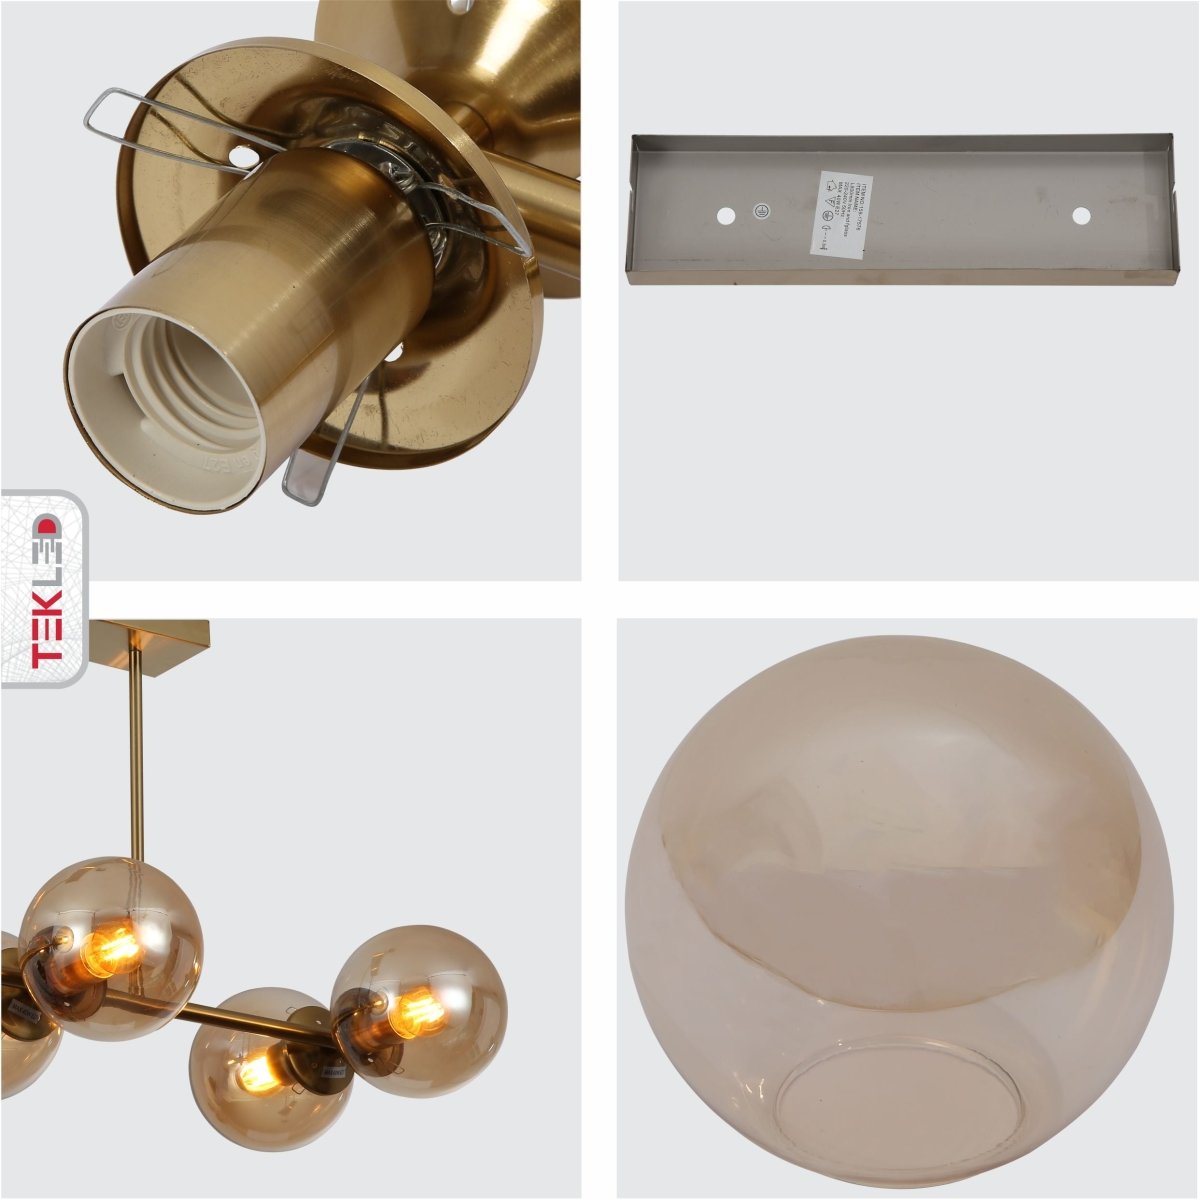 Detailed shots of Amber Globe Glass Gold Metal Body Ceiling Light with 6xE27 Fitting | TEKLED 159-17576